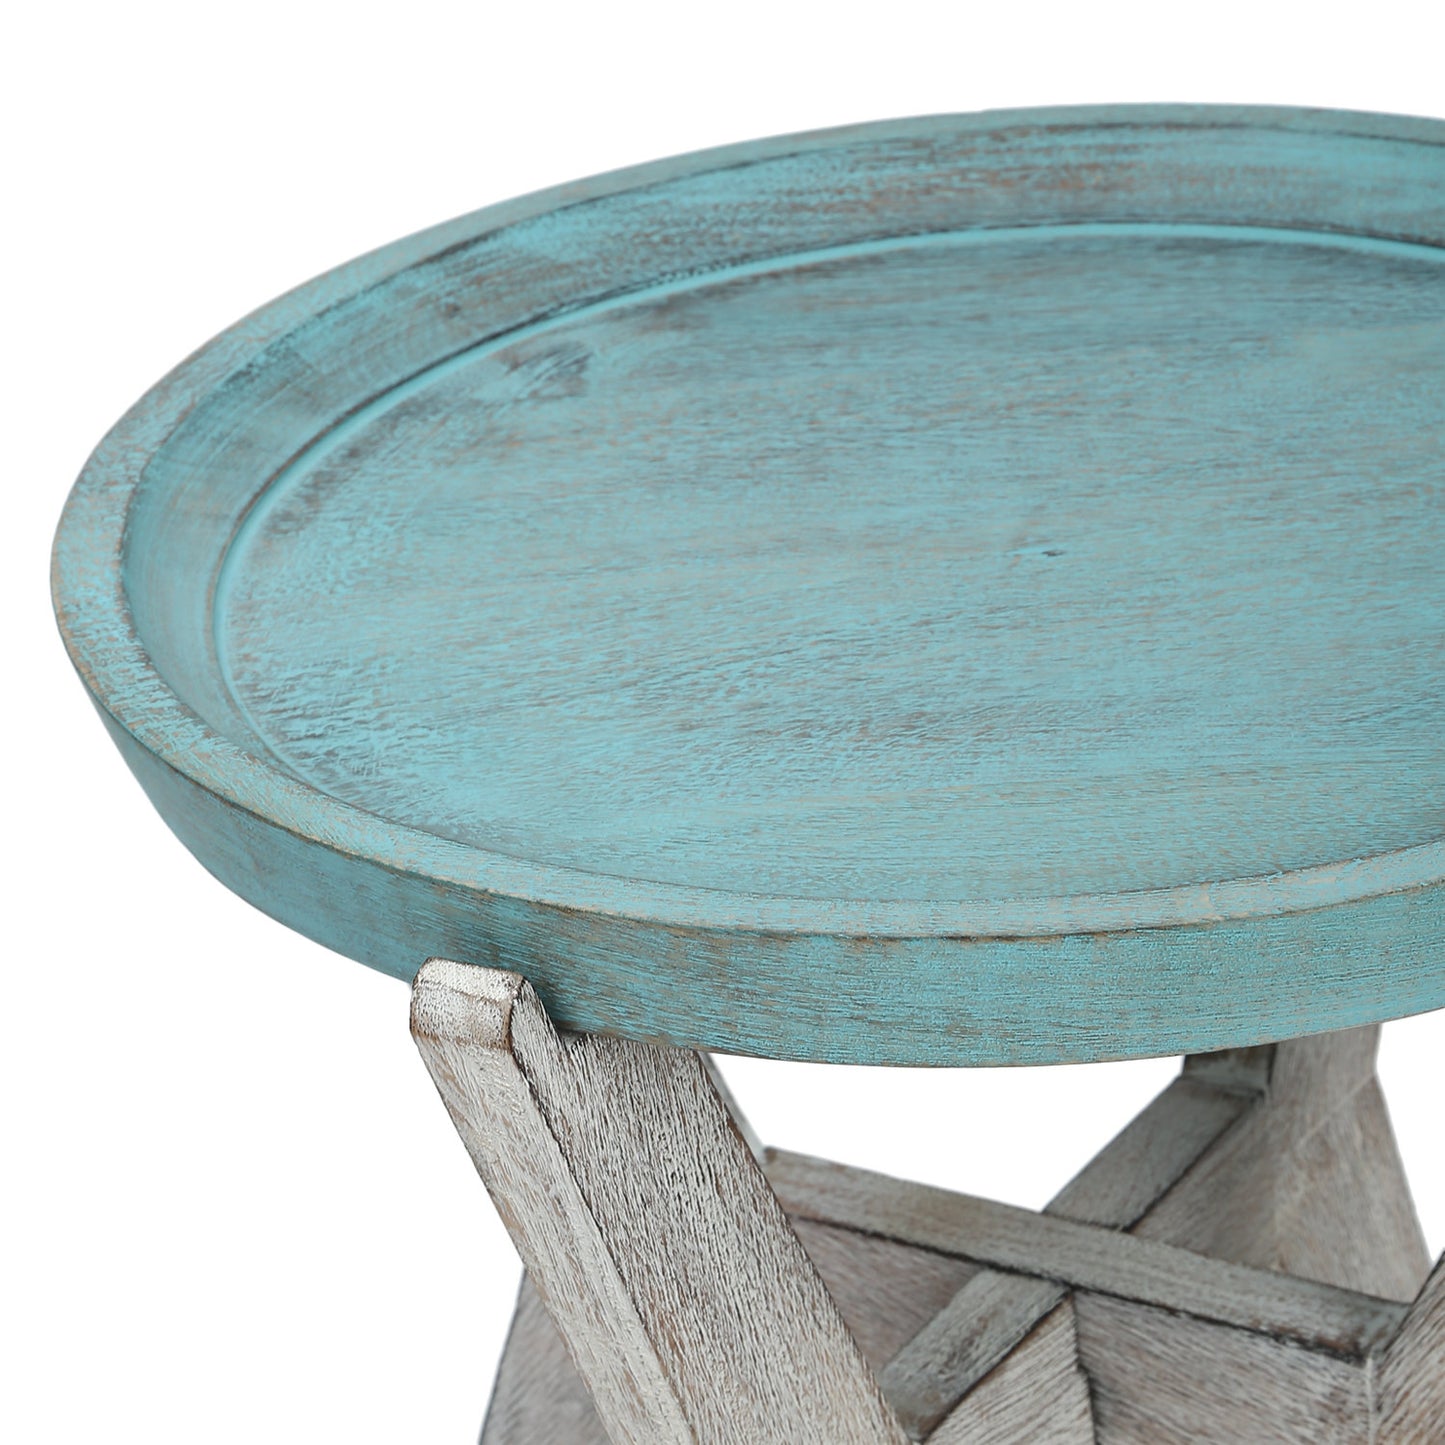 Serving Table Wood Side end Round Blue Rustic Wooden Tray Collapsible Distressed